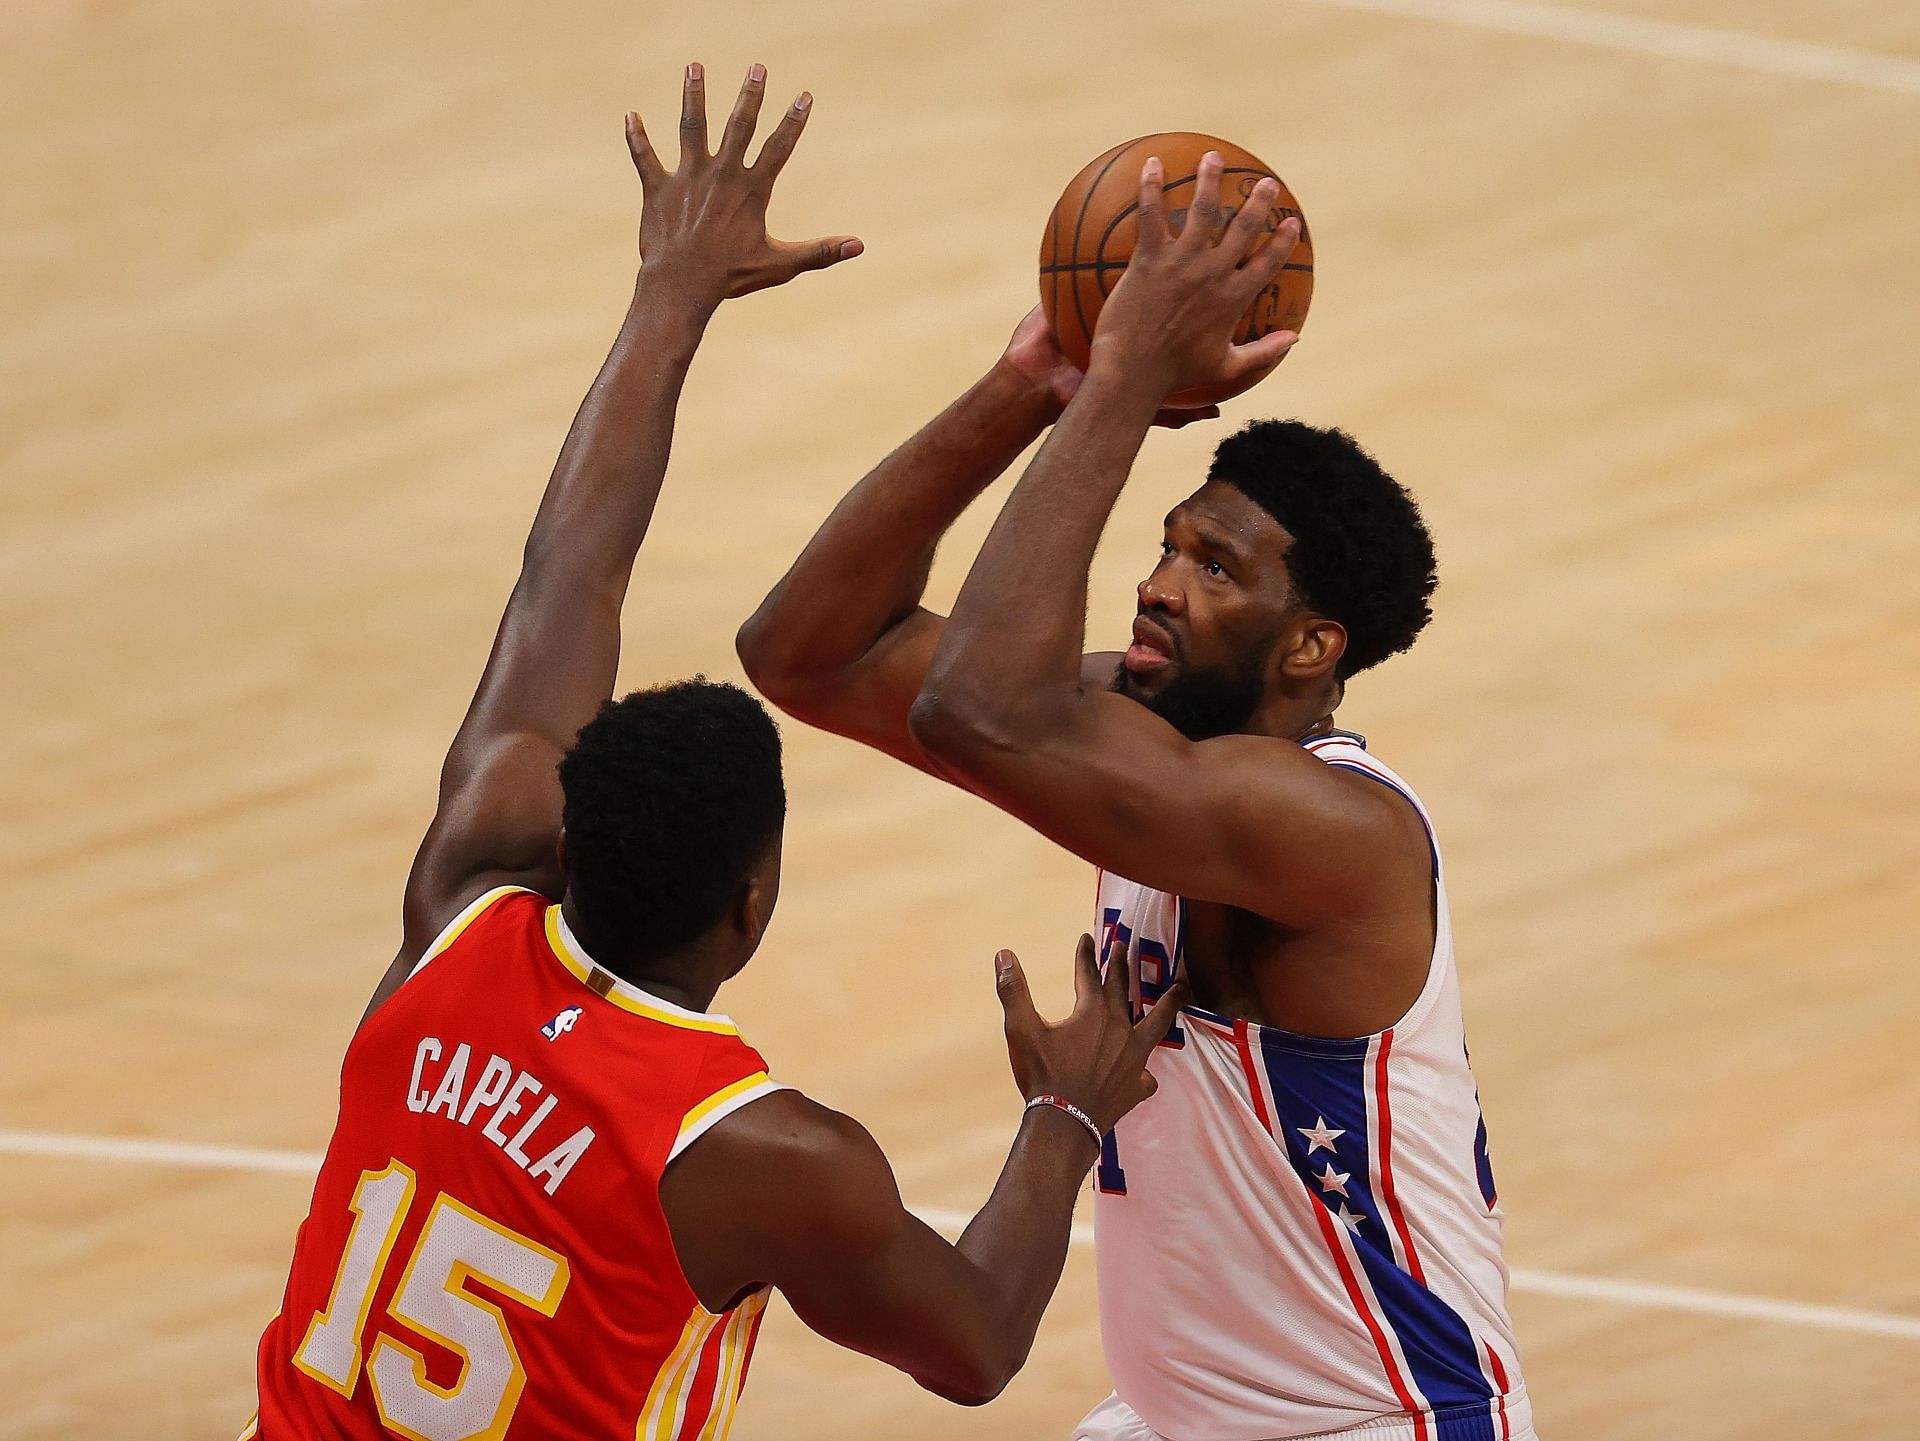 Joel Embiid #21 of the Philadelphia 76ers drives against Clint Capela #15 of the Atlanta Hawks during the first half of game 3 of the Eastern Conference Semifinals at State Farm Arena on June 11, 2021 in Atlanta, Georgia.